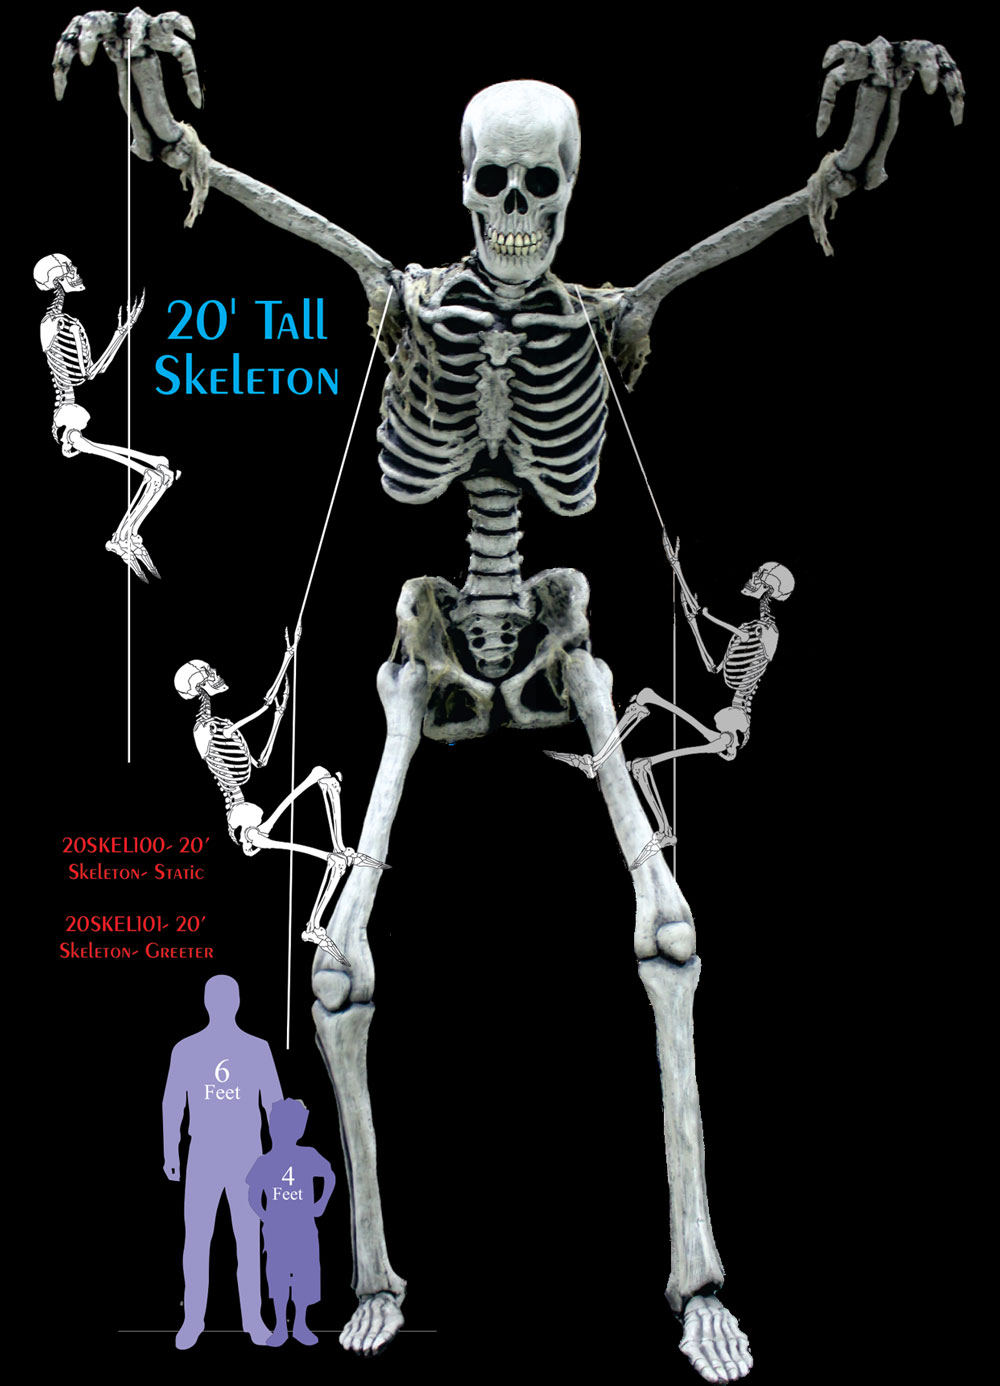 20’ Tall Skeleton Spectacle – Static or Greeter